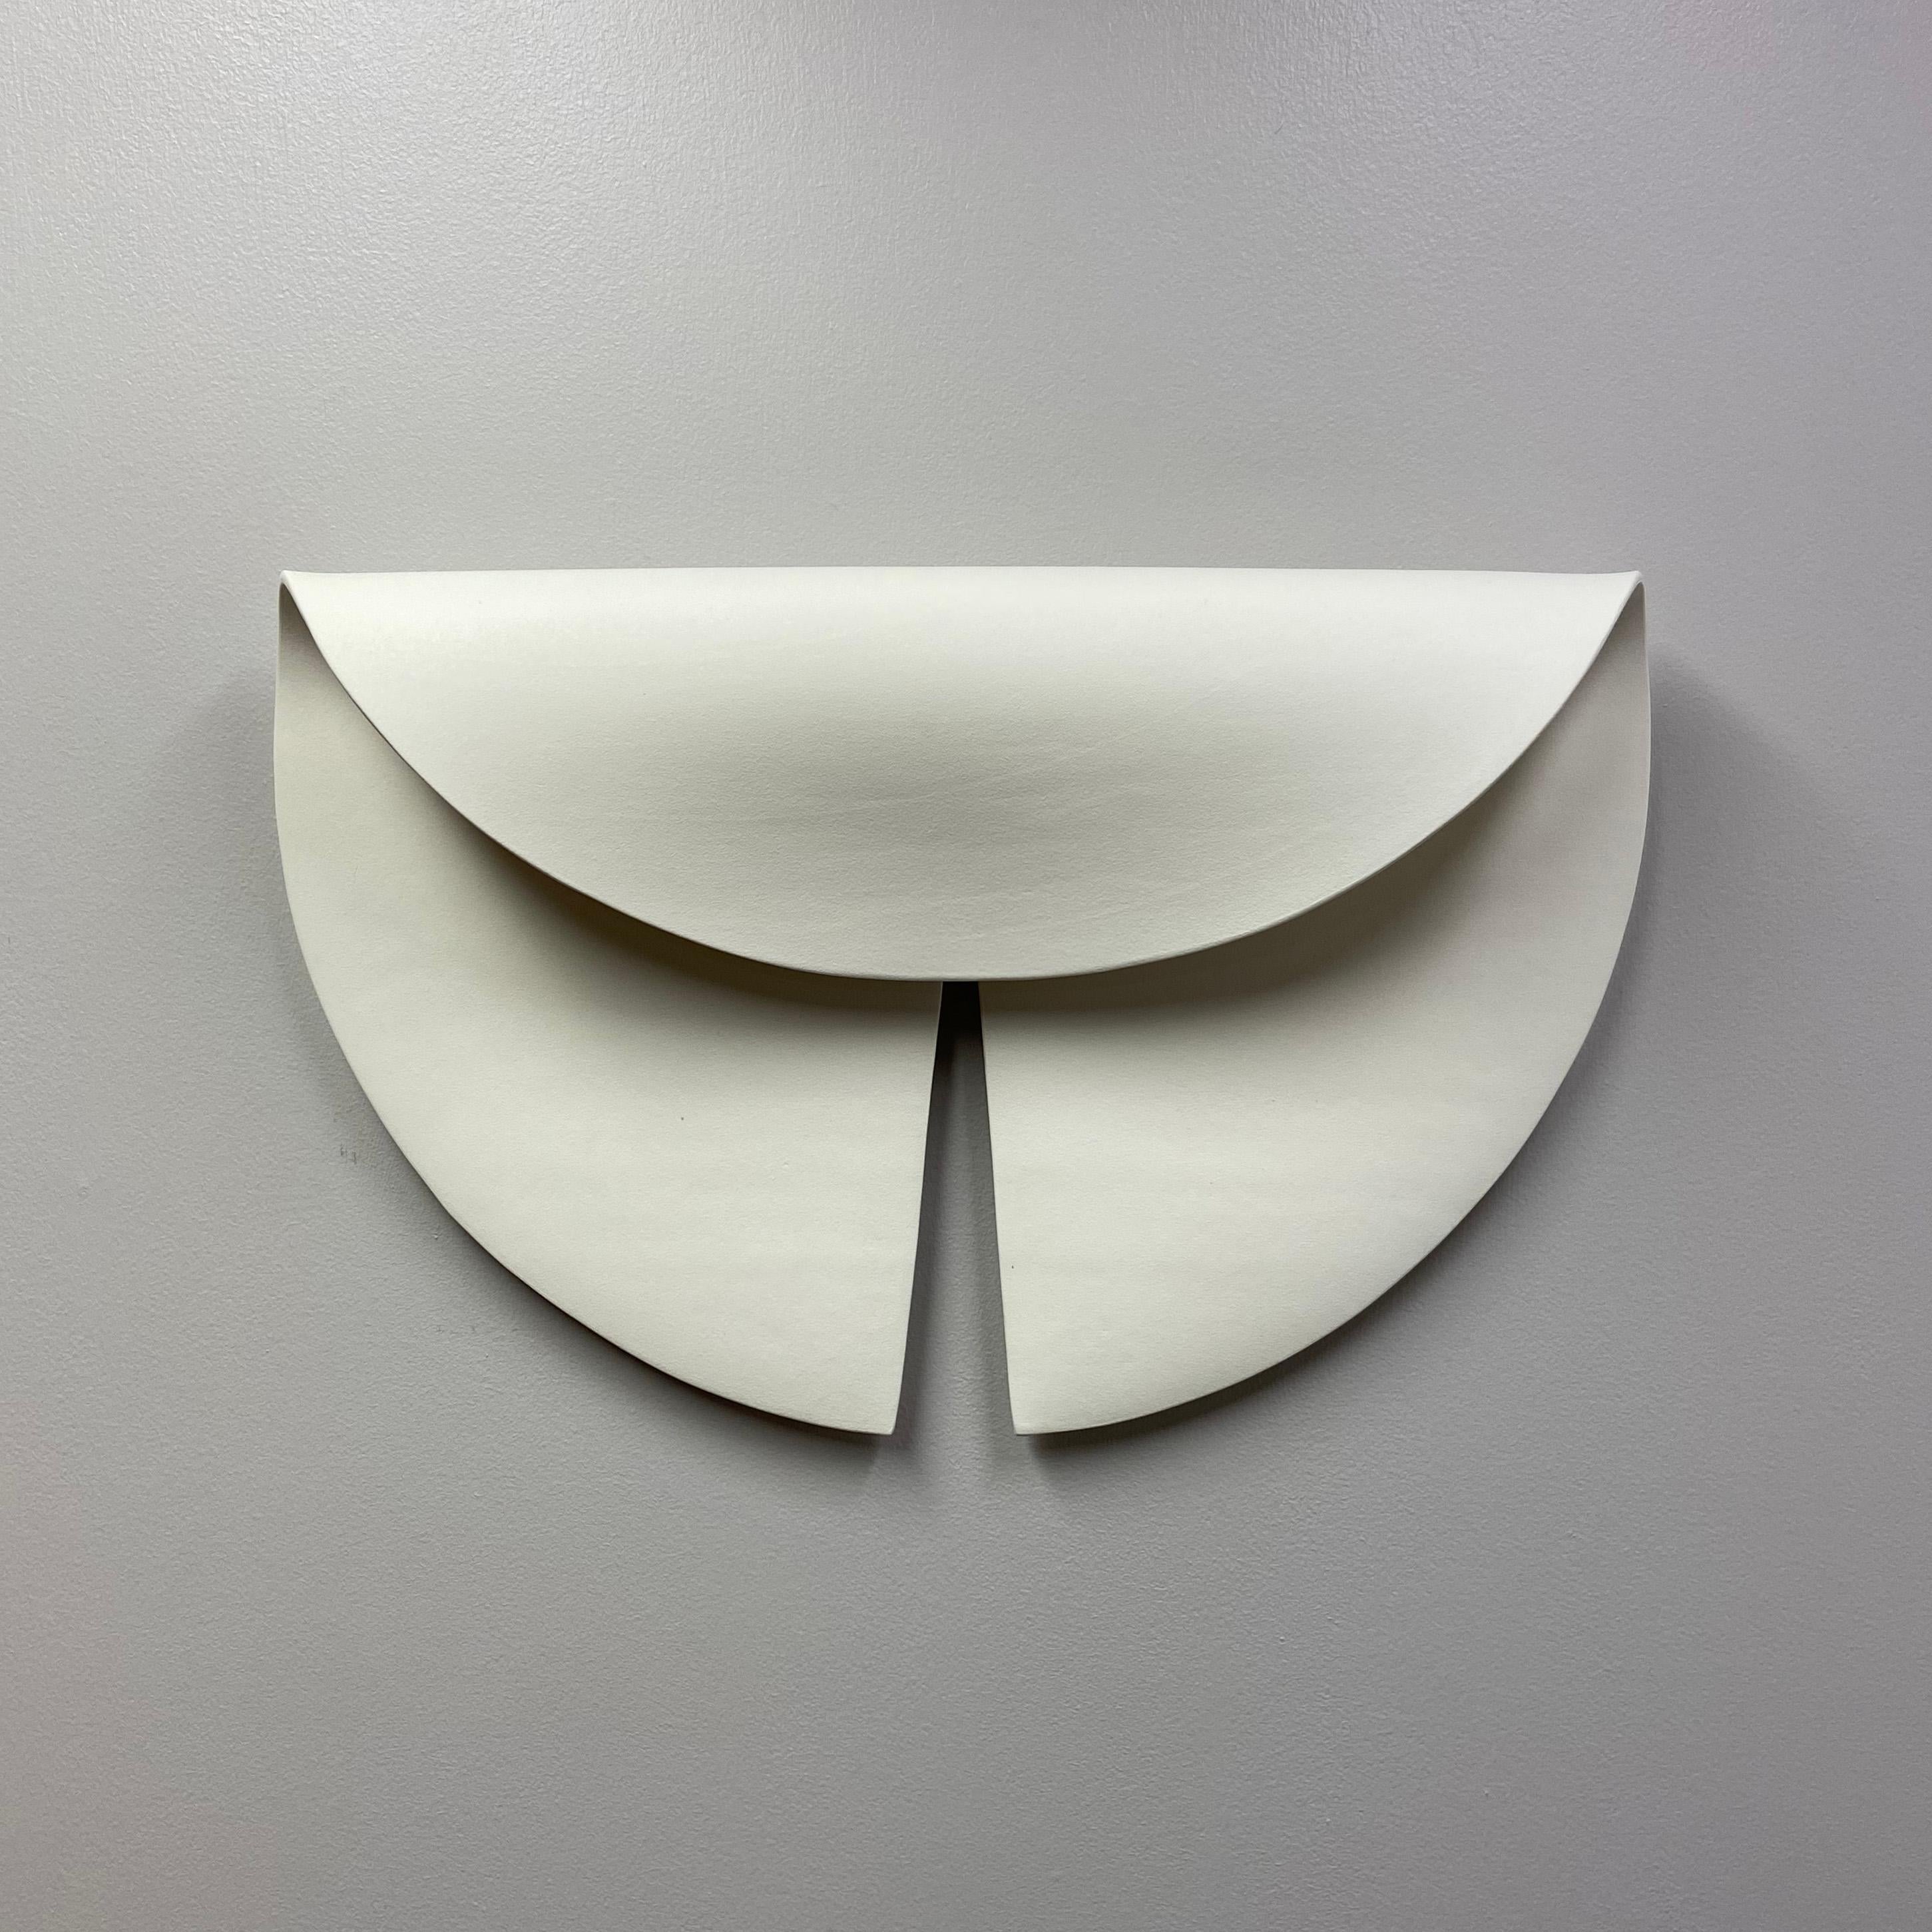 Contemporary Ceramic Wall Sculpture: 'Leaf' / By Olivia Barry For Sale